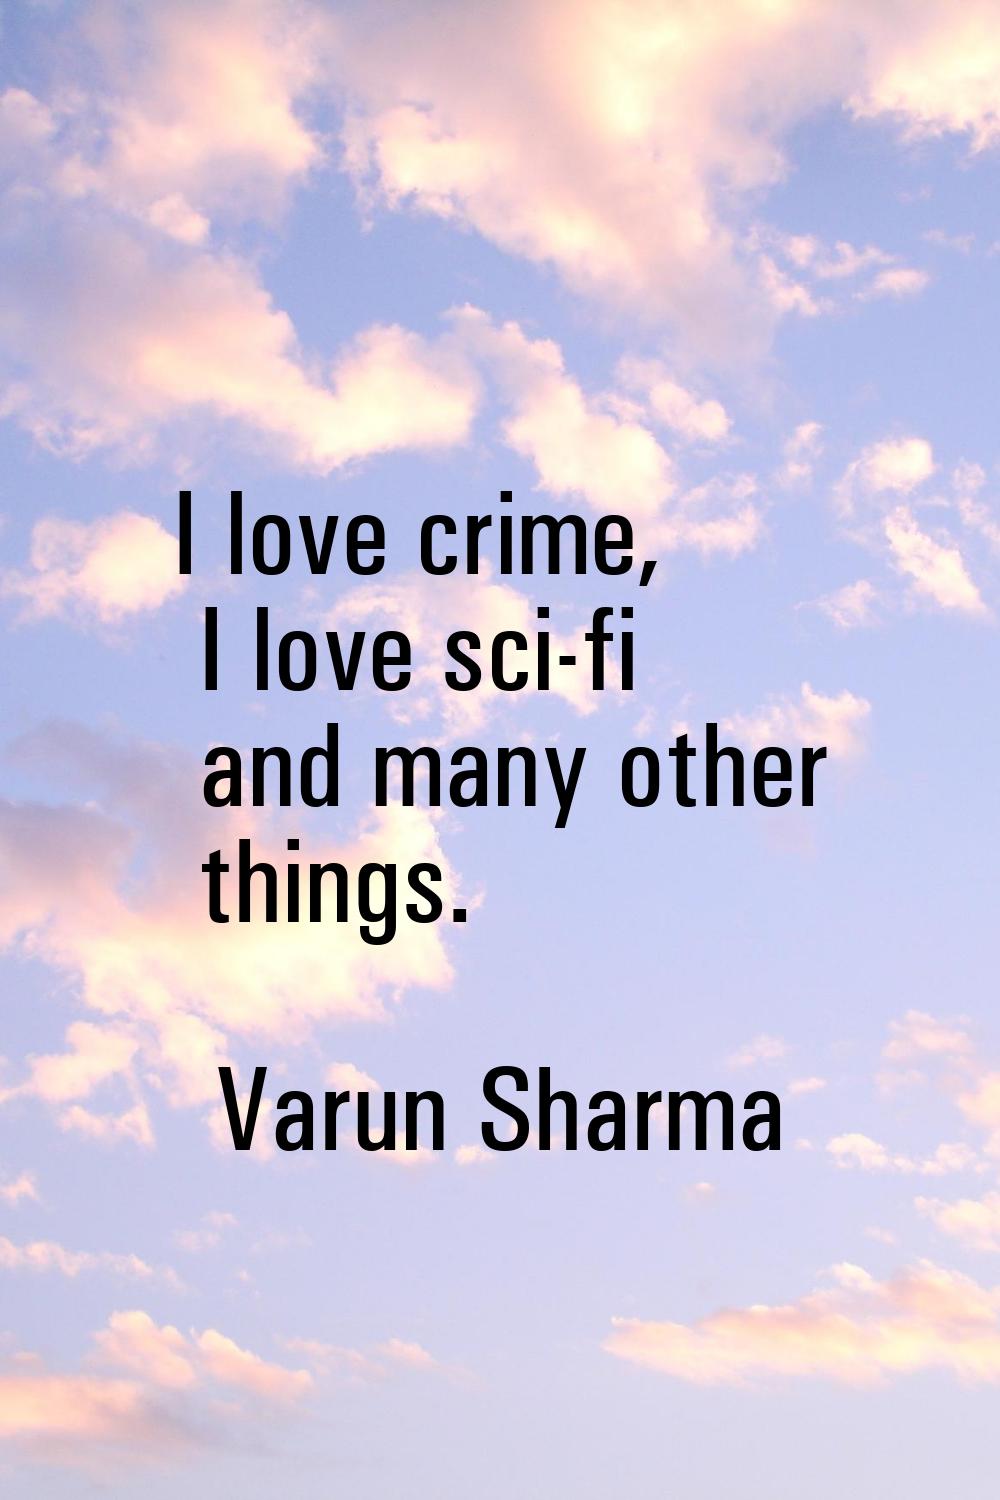 I love crime, I love sci-fi and many other things.